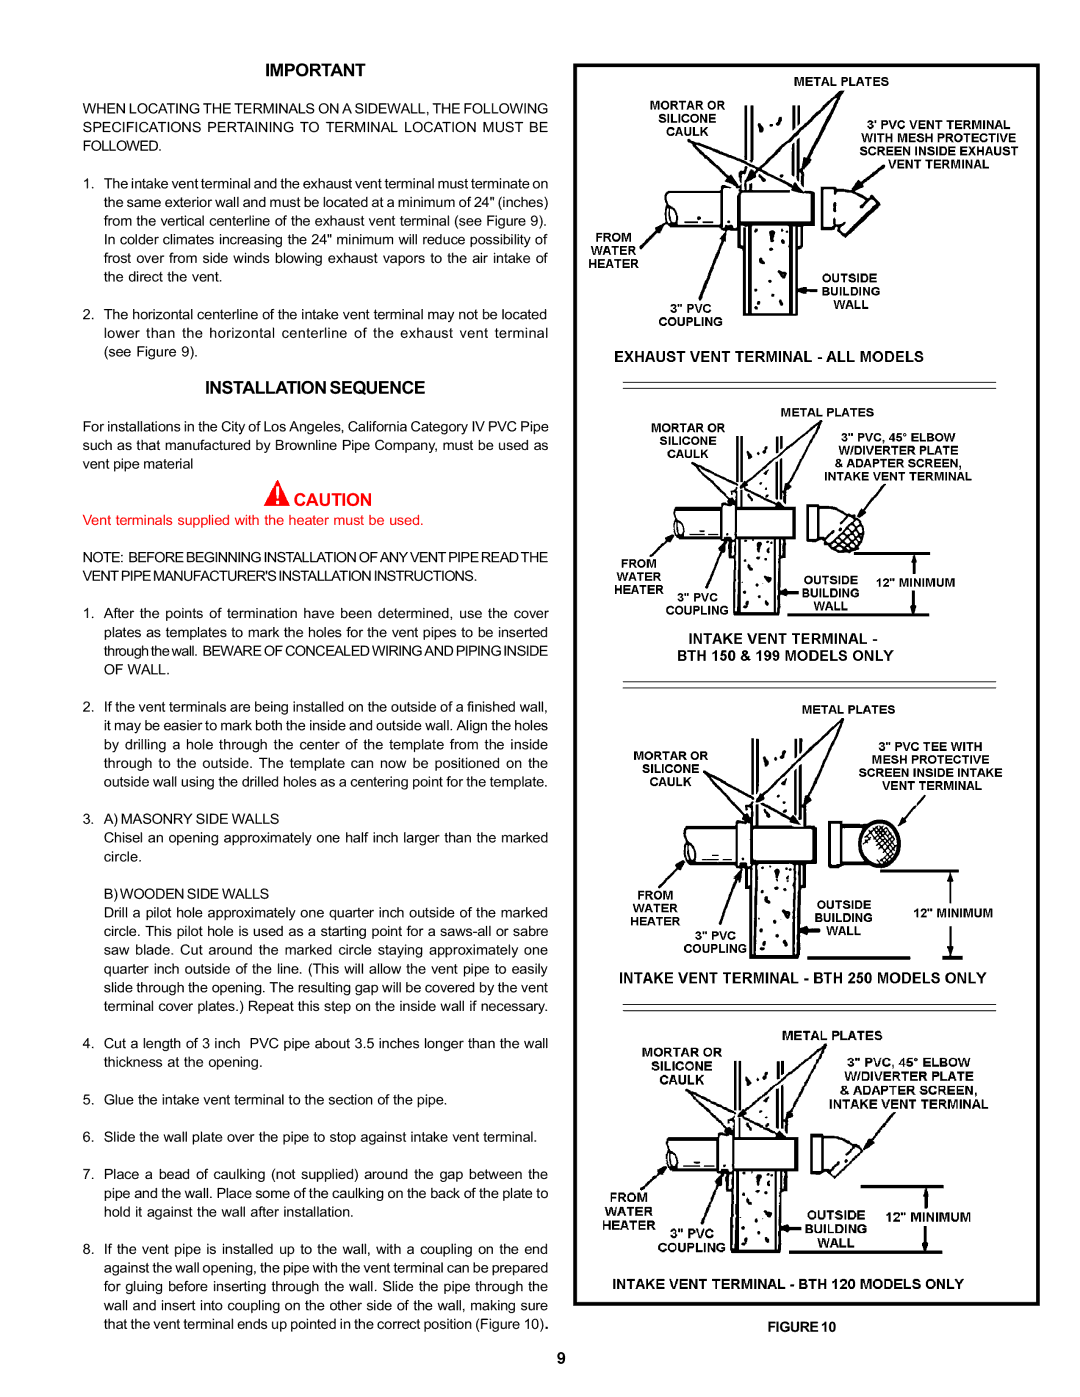 A.O. Smith BTH 120 - 250 Installation Sequence, Vent Pipe Manufacturers Installation Instructions, Masonry Side Walls 